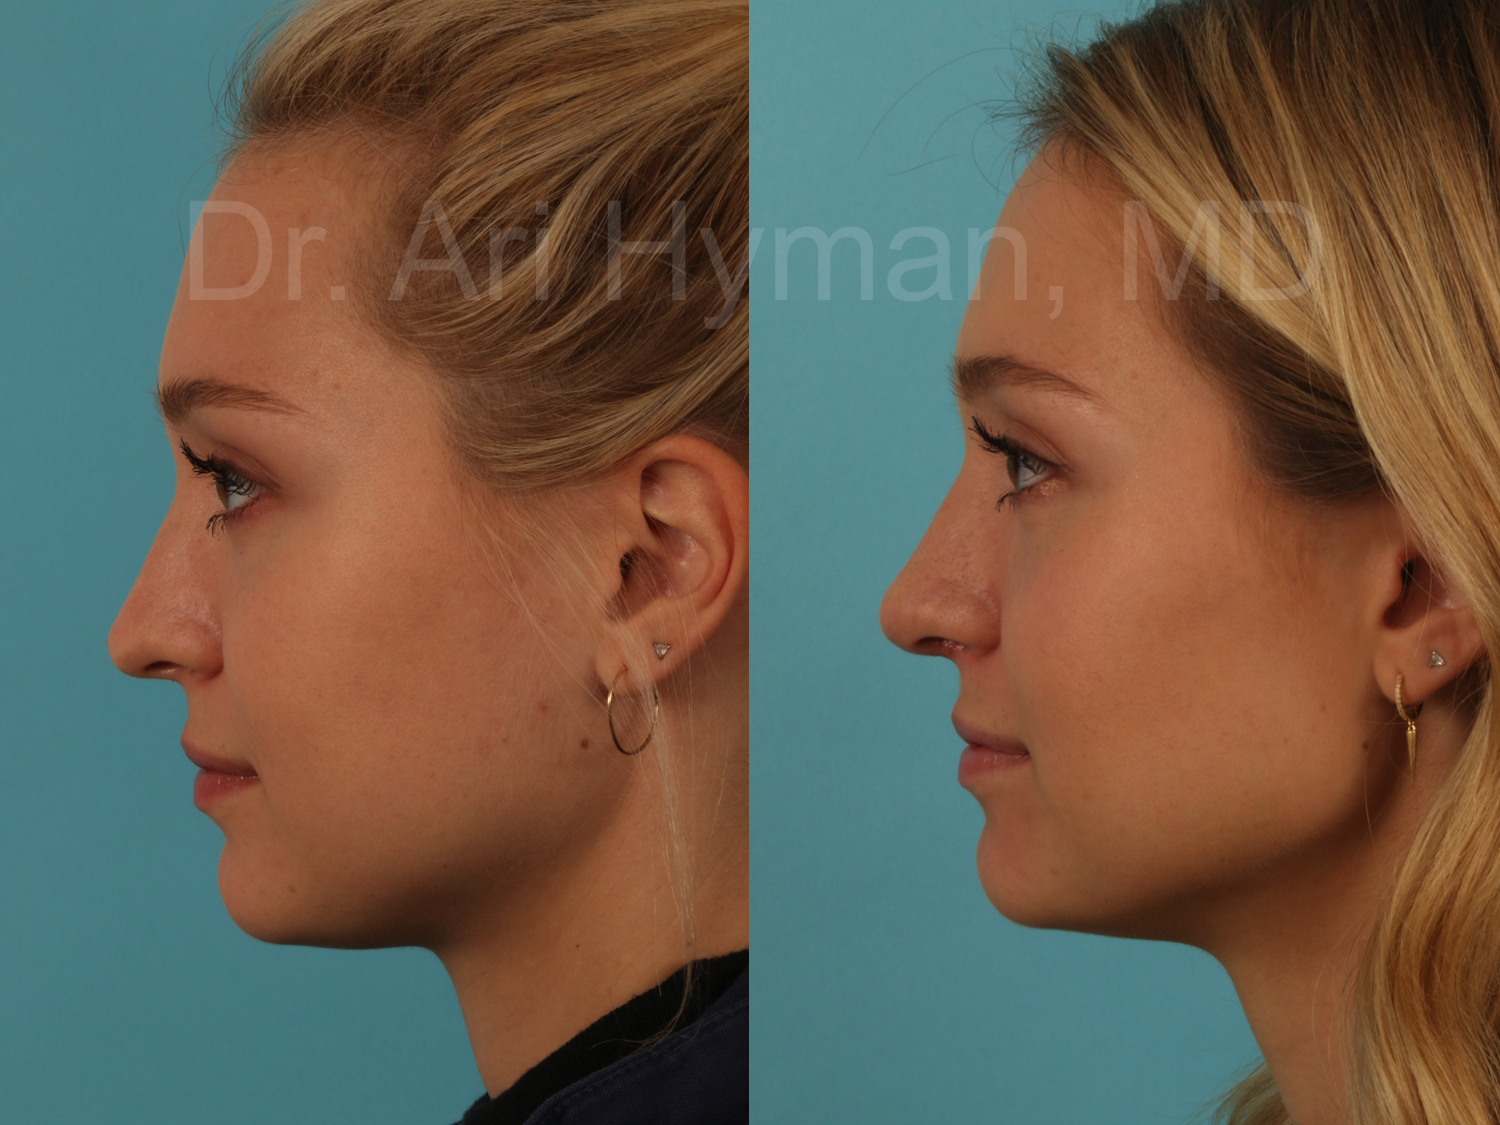 revision rhinoplasty - before and after view of woman's nose